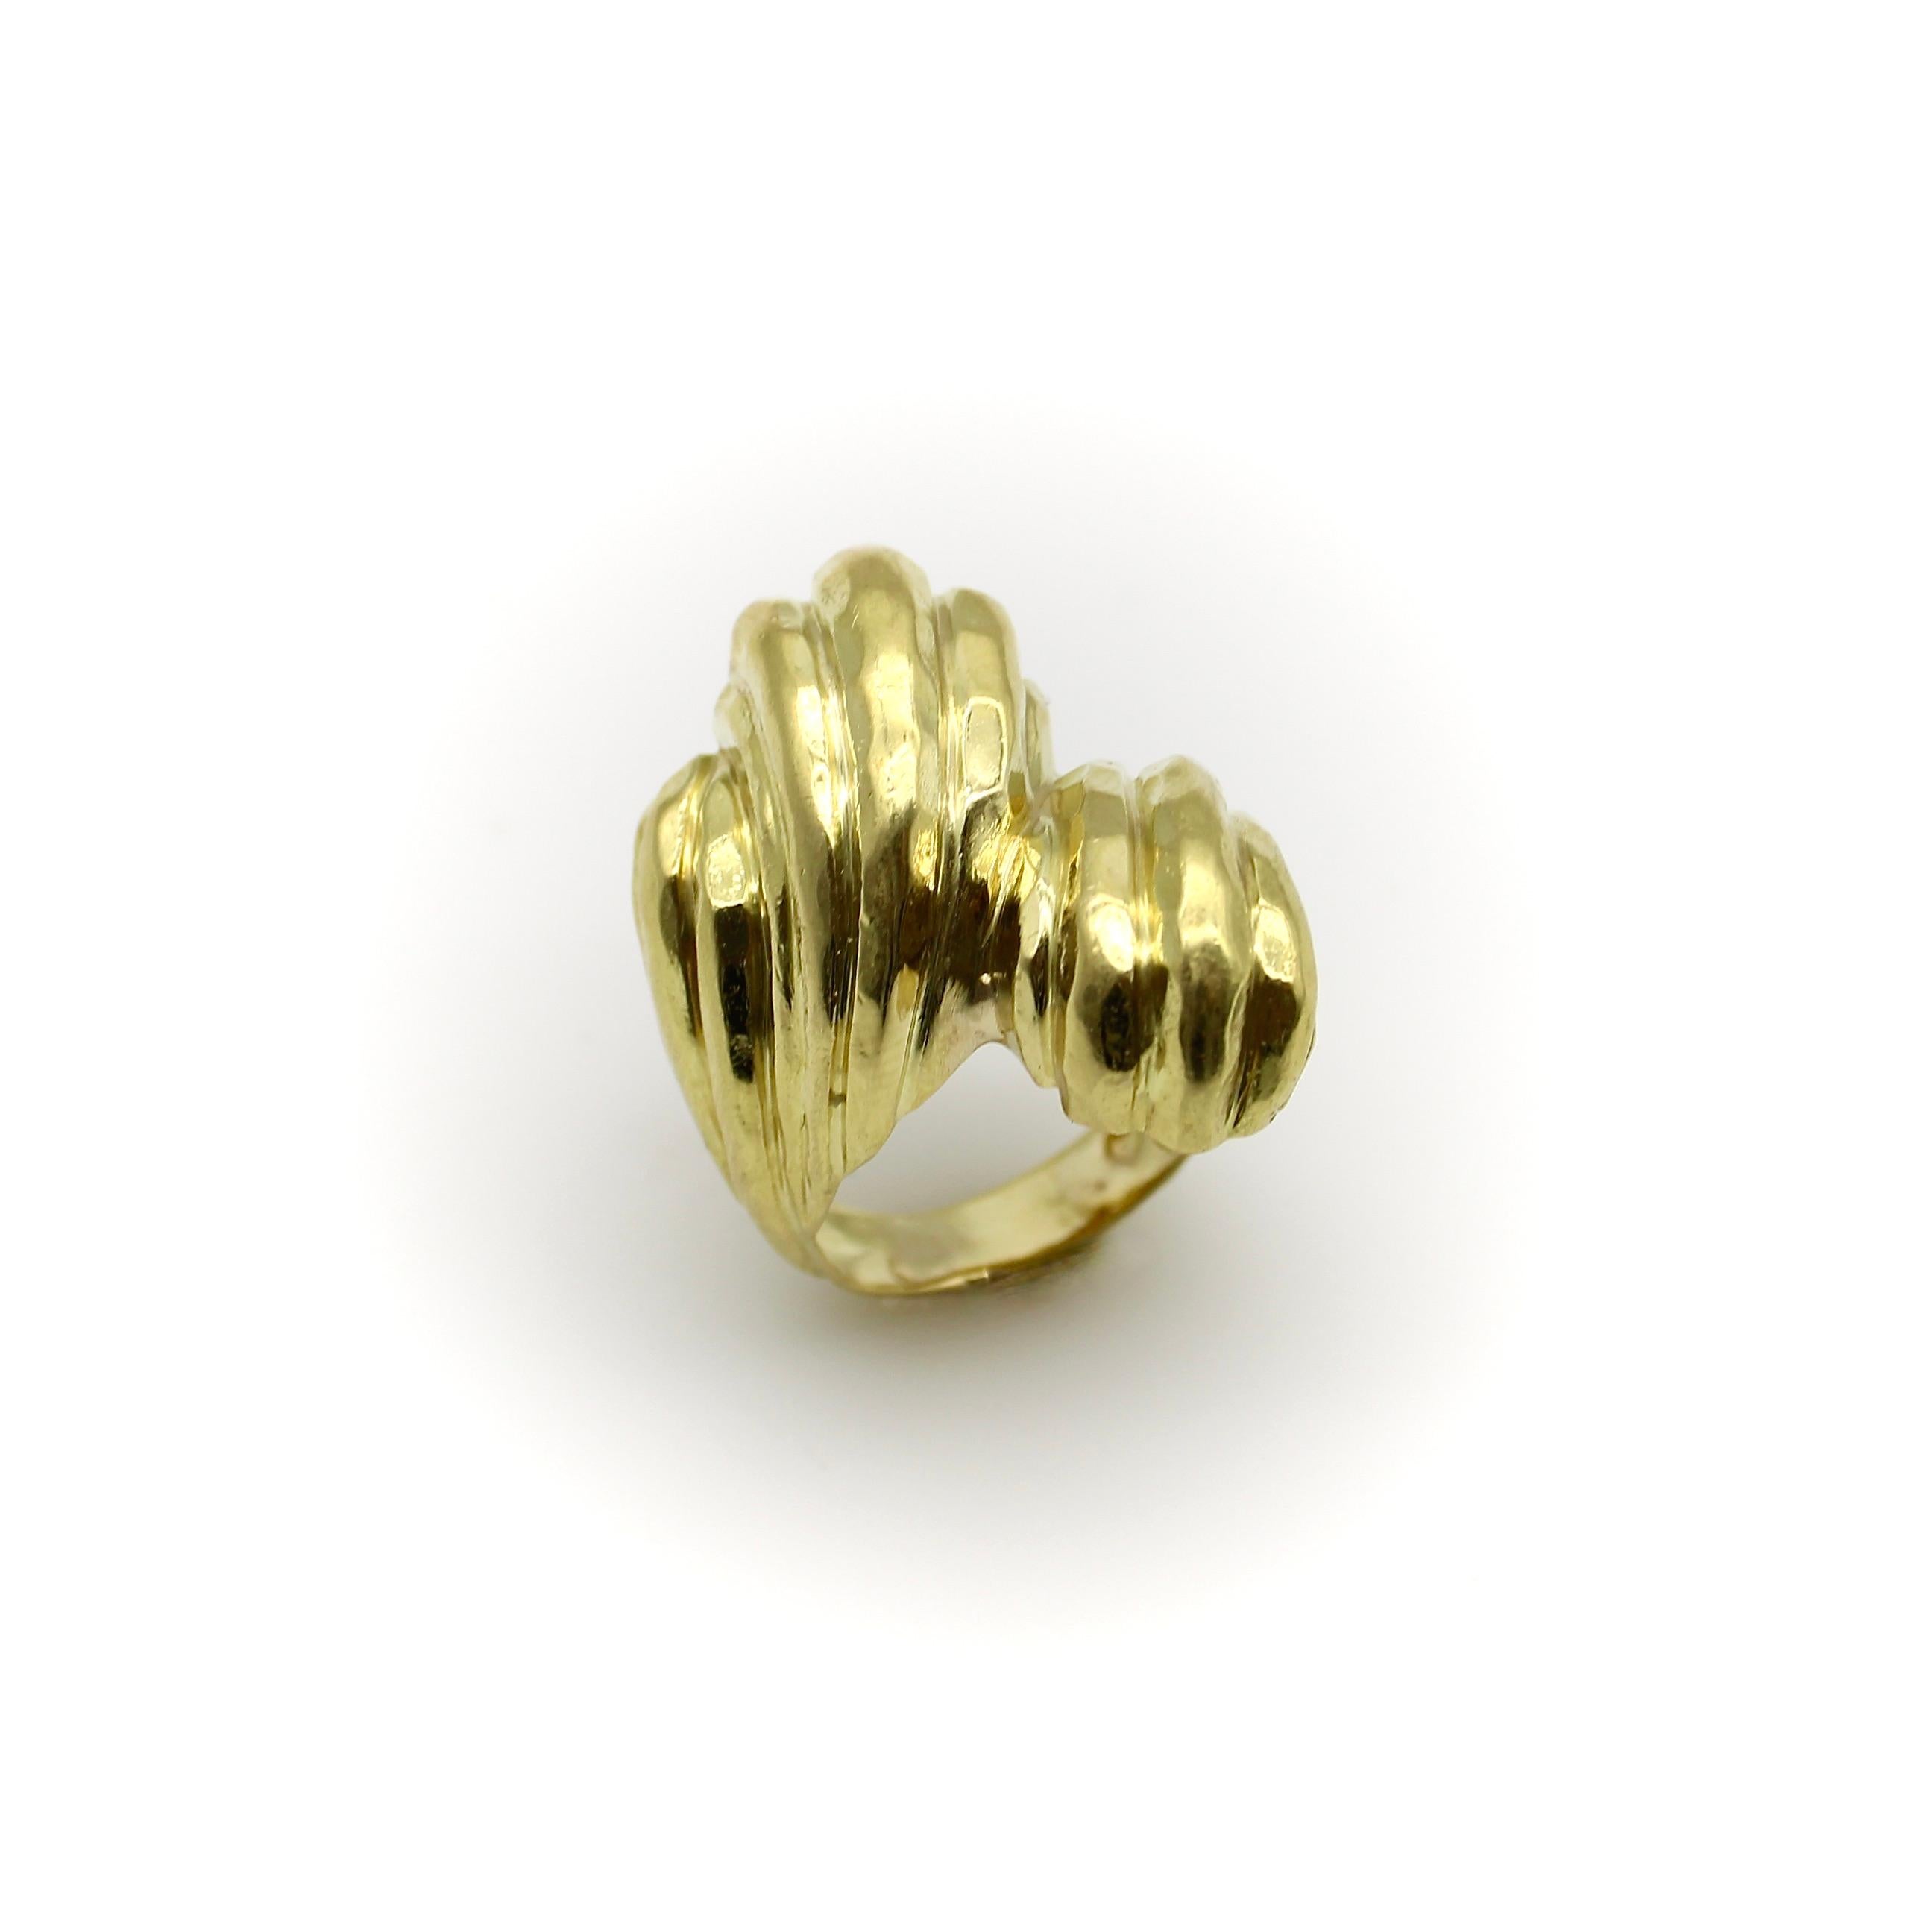 This 18k gold ring is big and bold—a classic Henry Dunay design that has great presence on the hand. The ring is sculptural, with a hand-hammered finish that accentuates the large faceted planes of gold that reflect the light for a mesmerizing